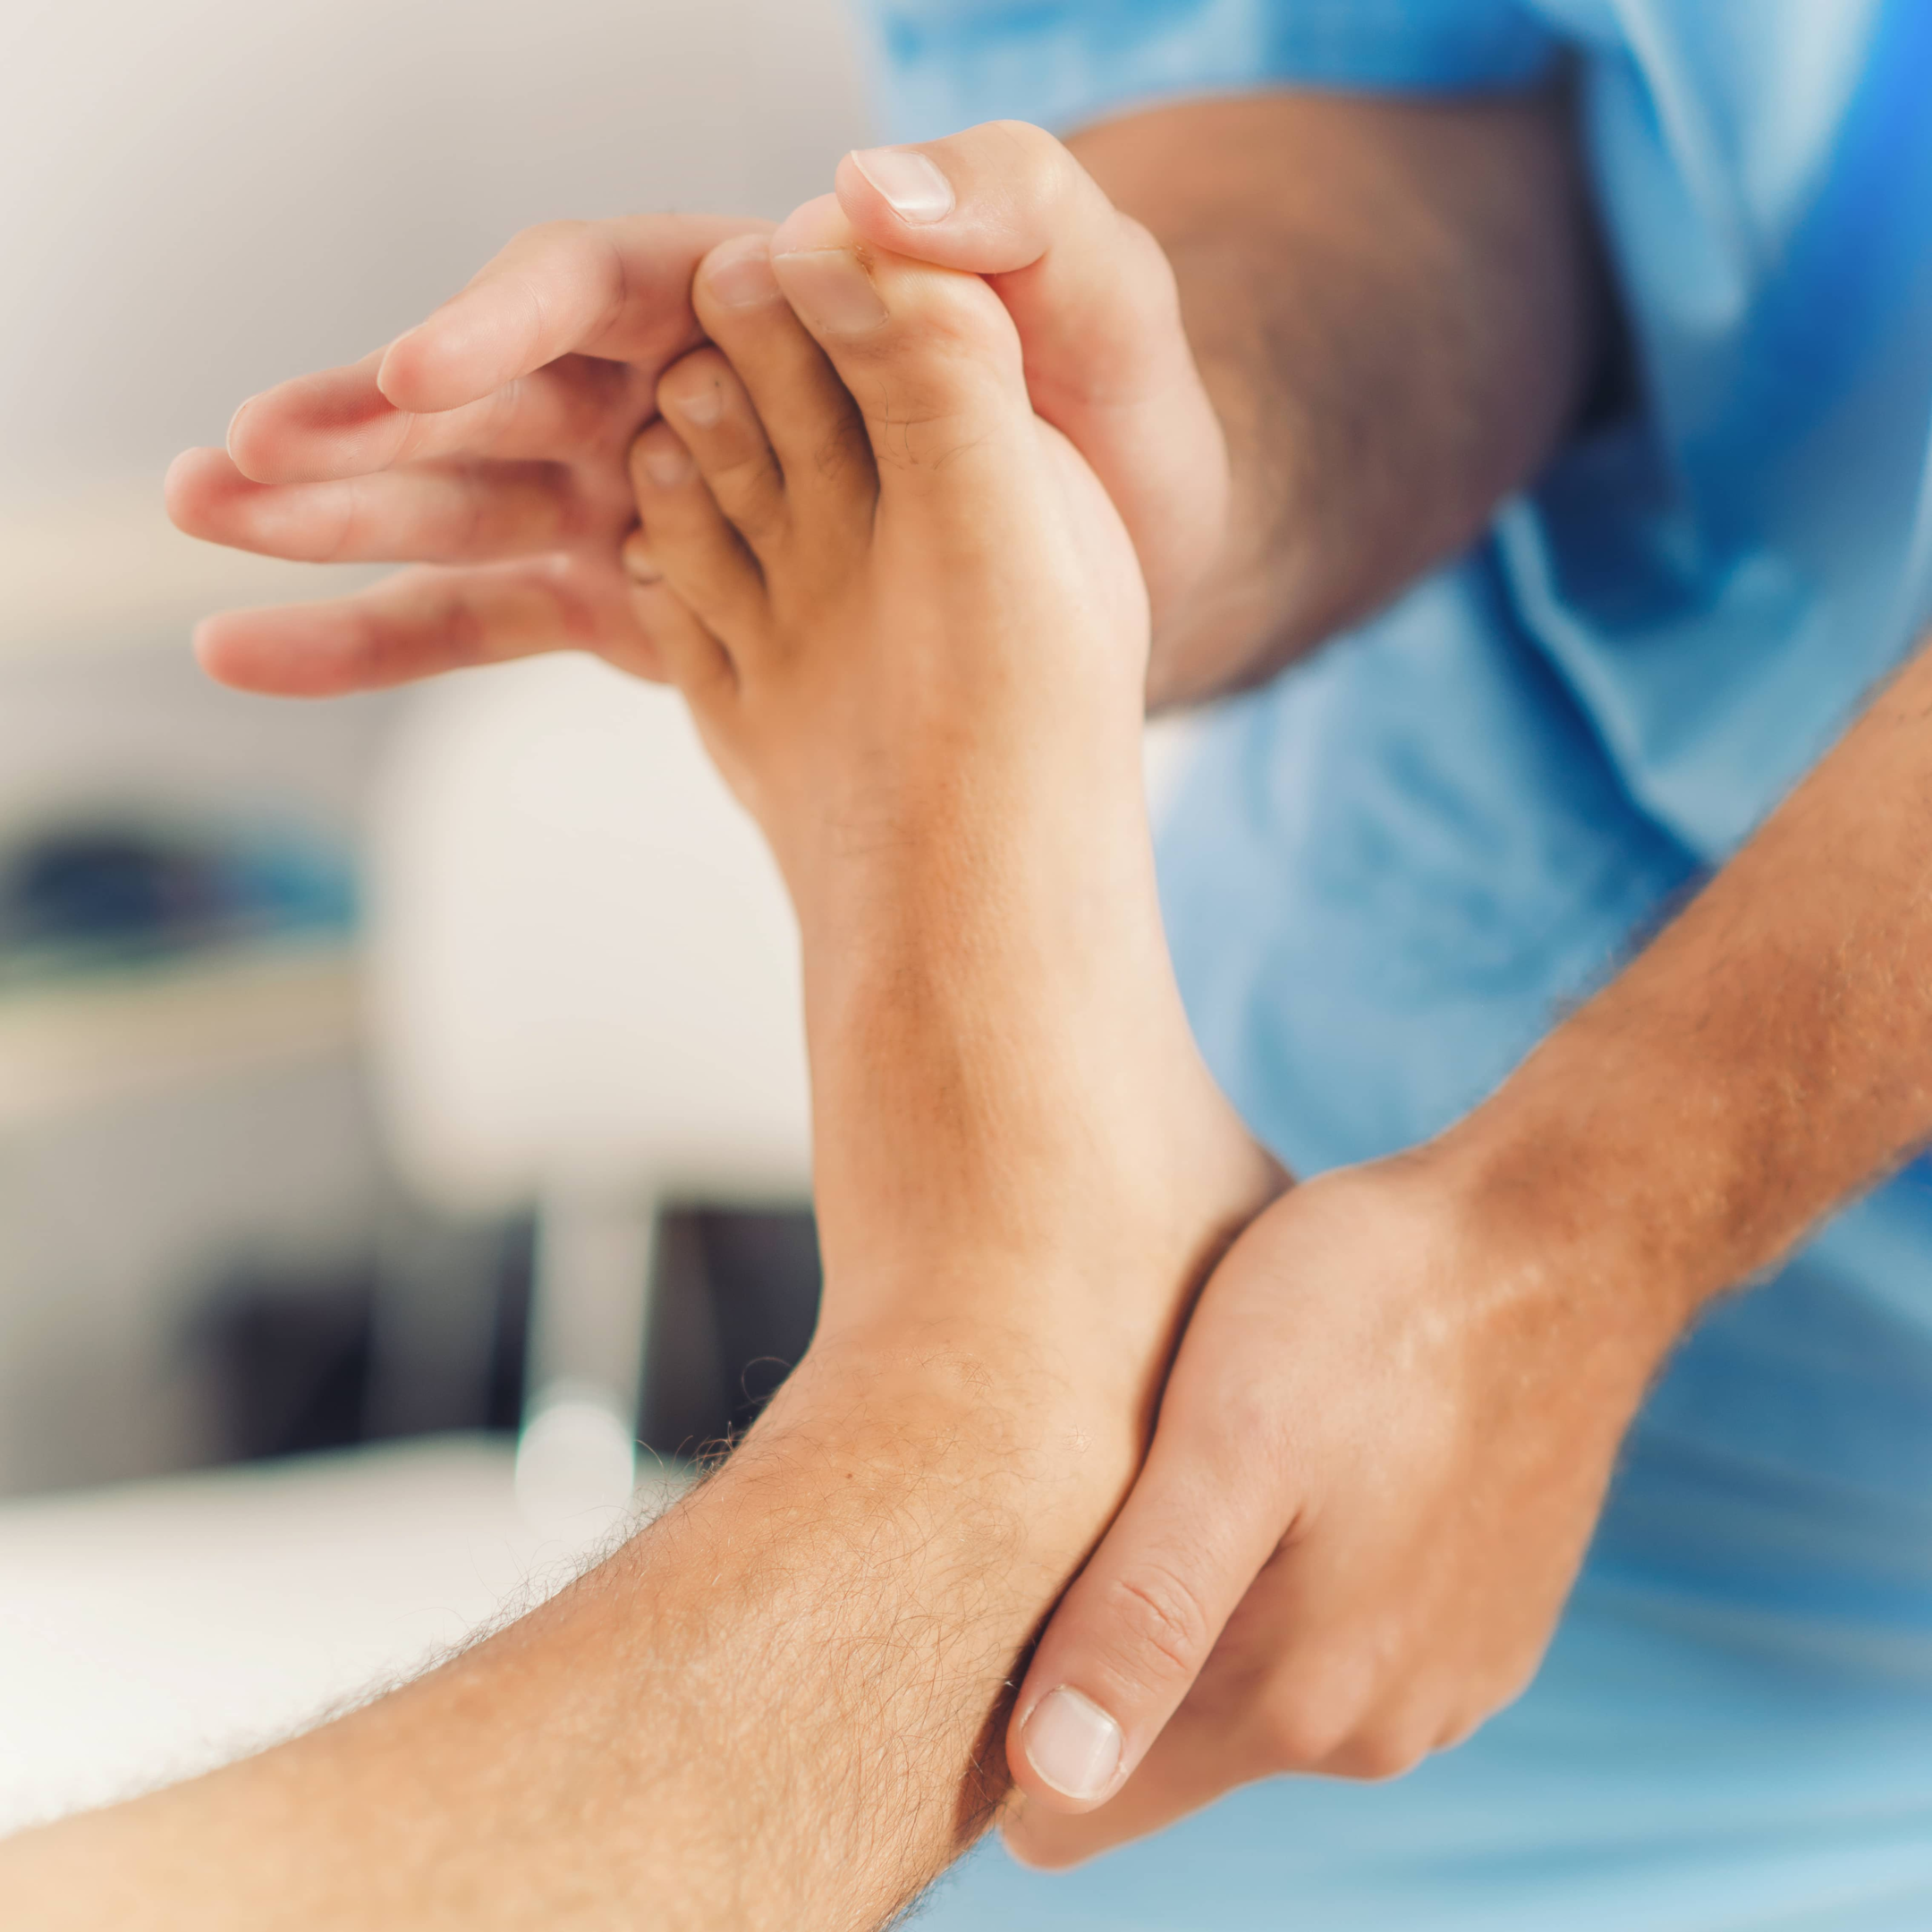 chiropractor stretching the extensor tendons with hand on top of the foot, for tendonitis  Main symptom is pain from tendinitis, so plantar flexion is avoided during treatment.